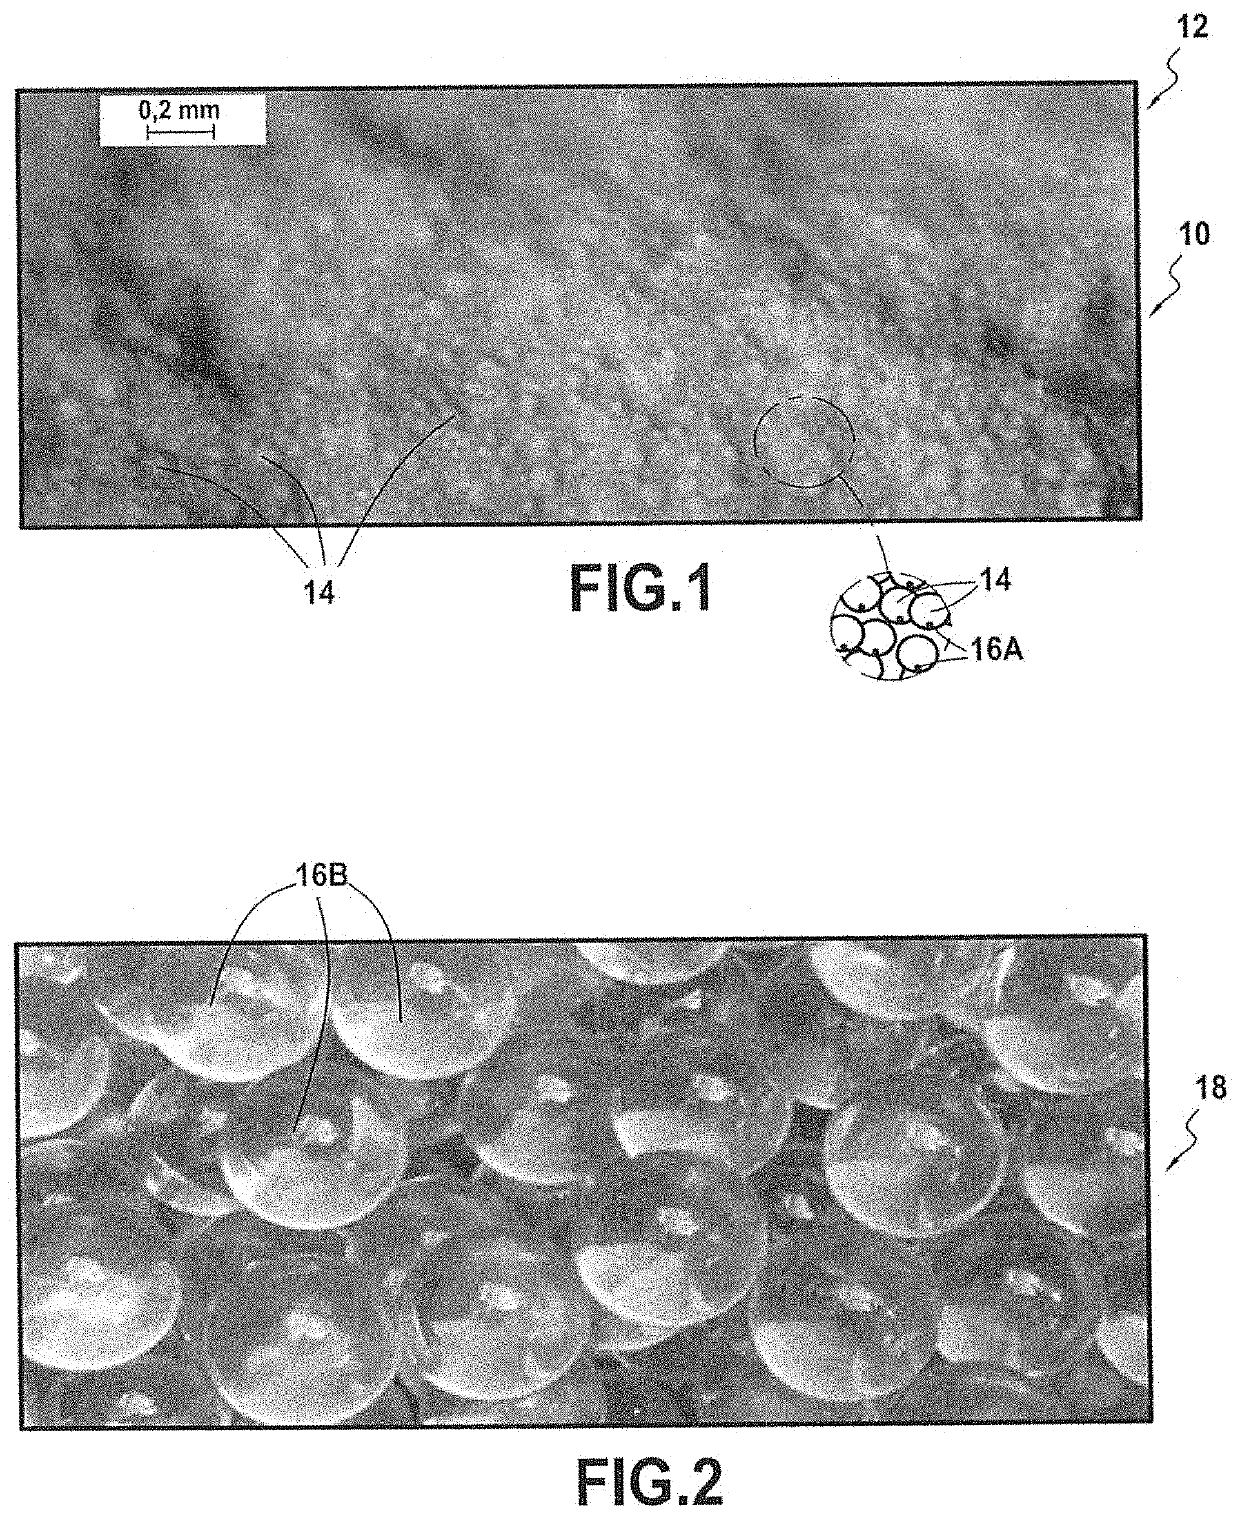 Method for manufacturing a porous abradable coating made of ceramic material